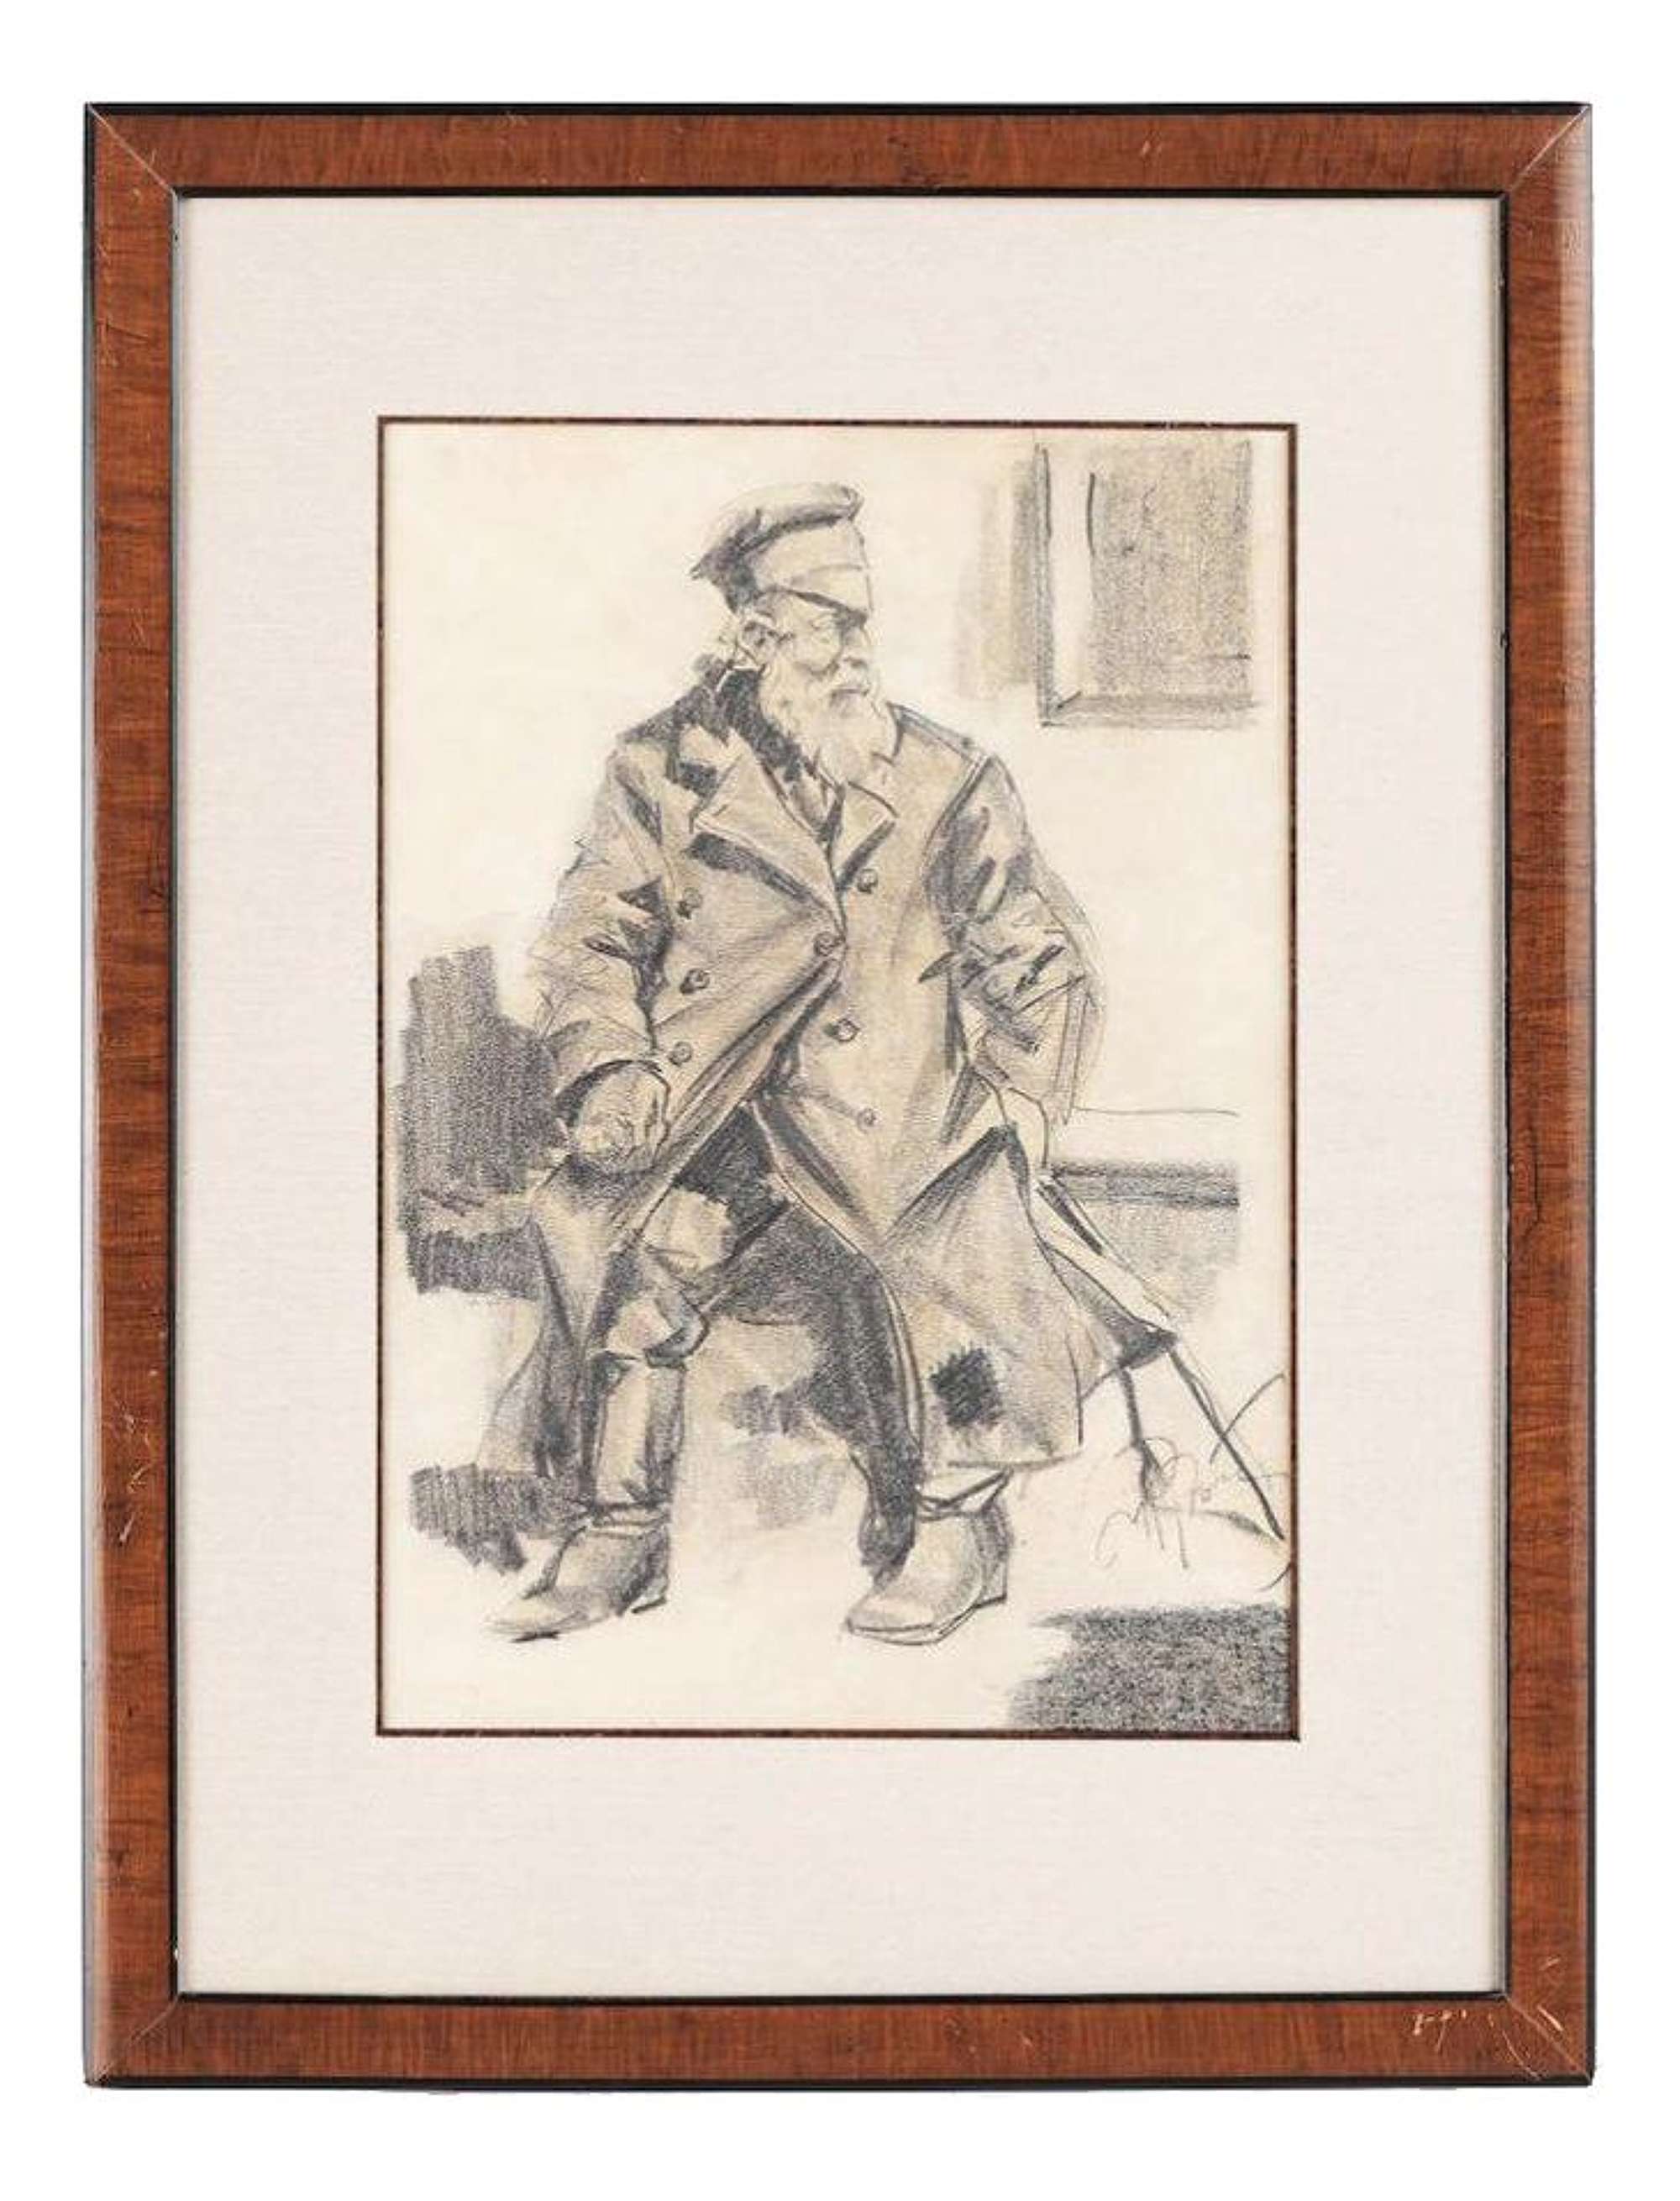 I Repin, The Old Man on the Bench, Pencil on Paper, Framed